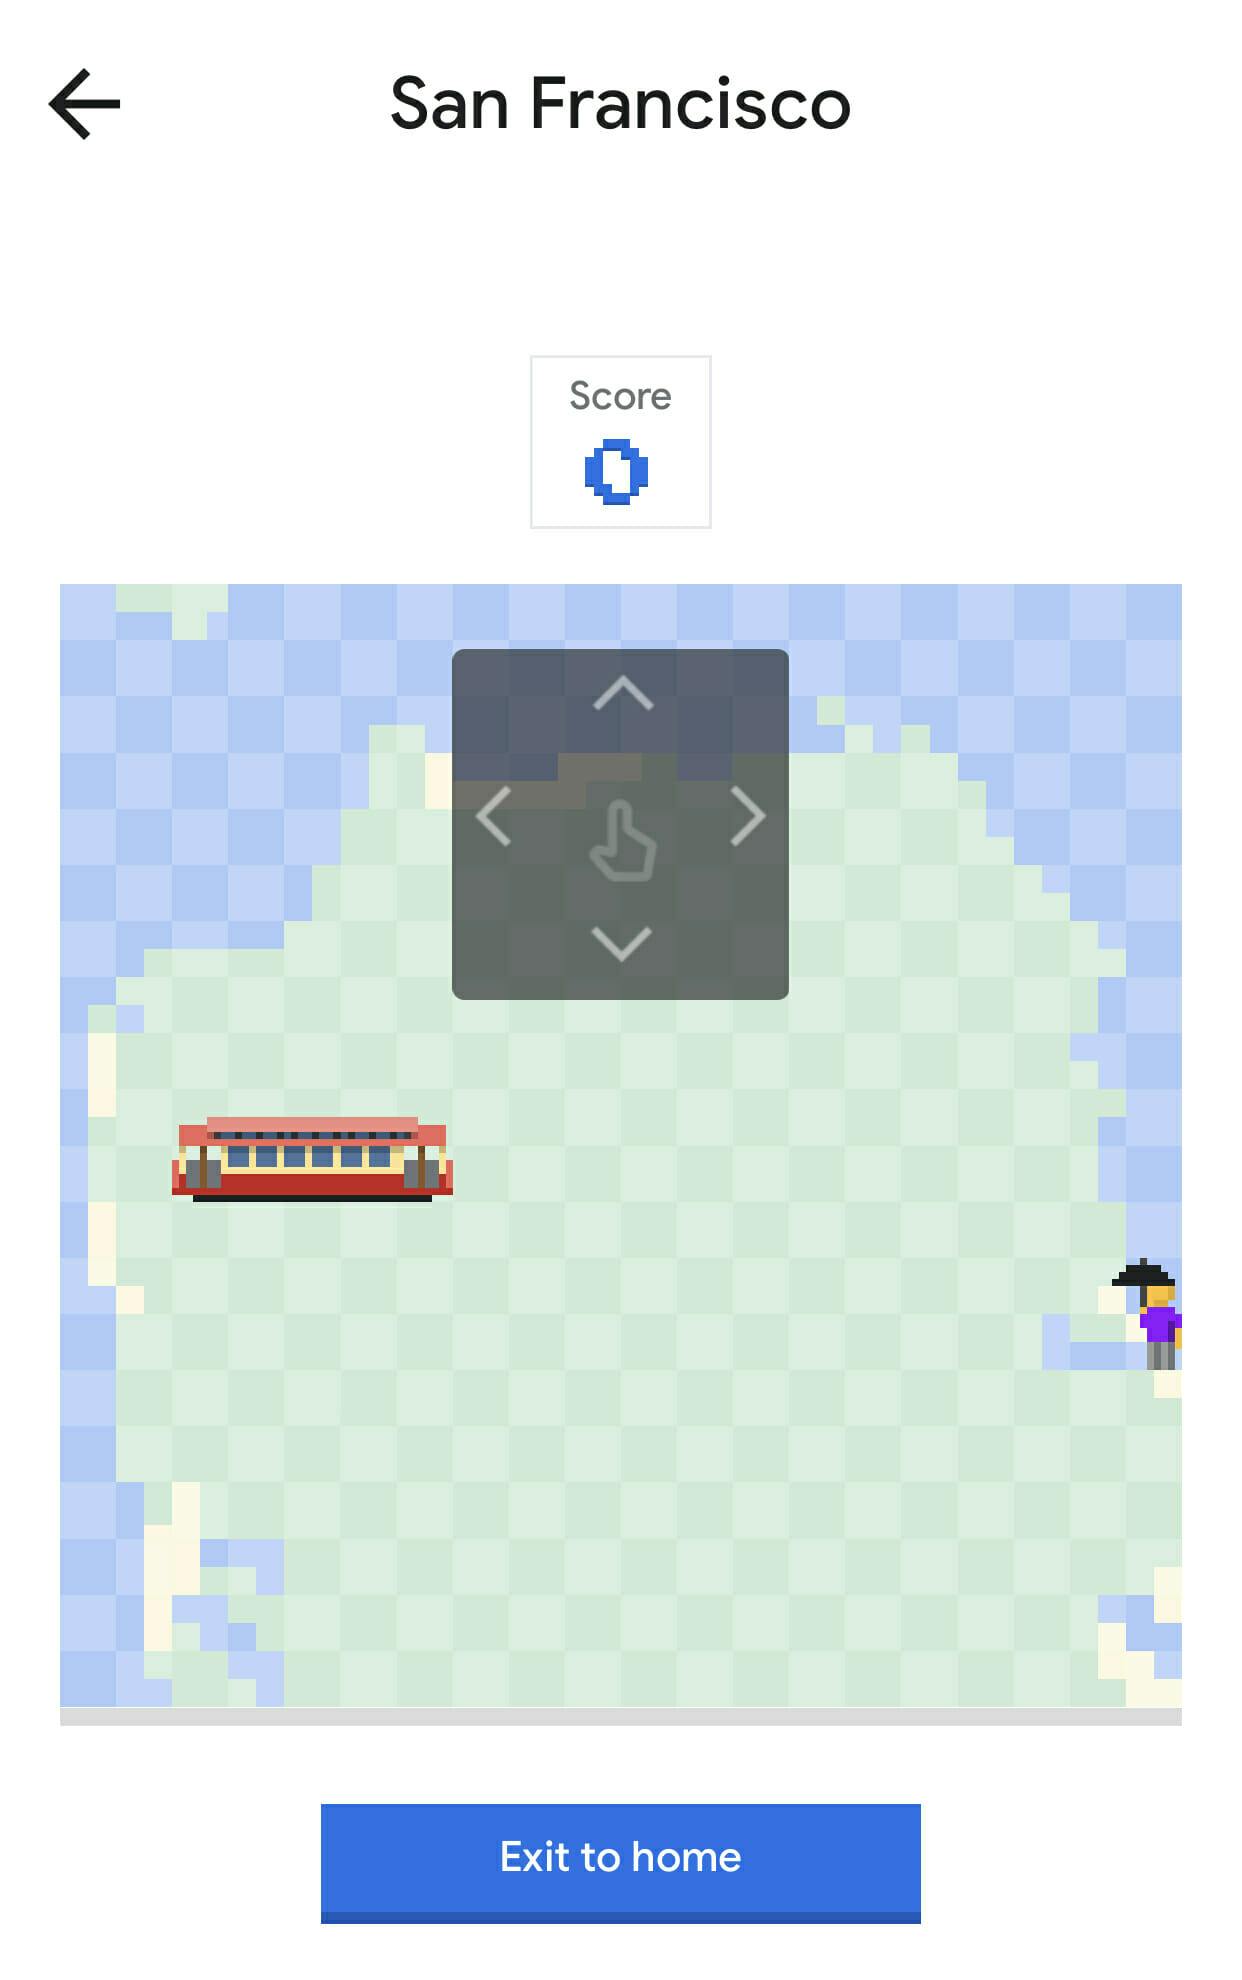 Google Maps Gains Version of Classic 'Snake' Game for April Fools' Day -  MacRumors